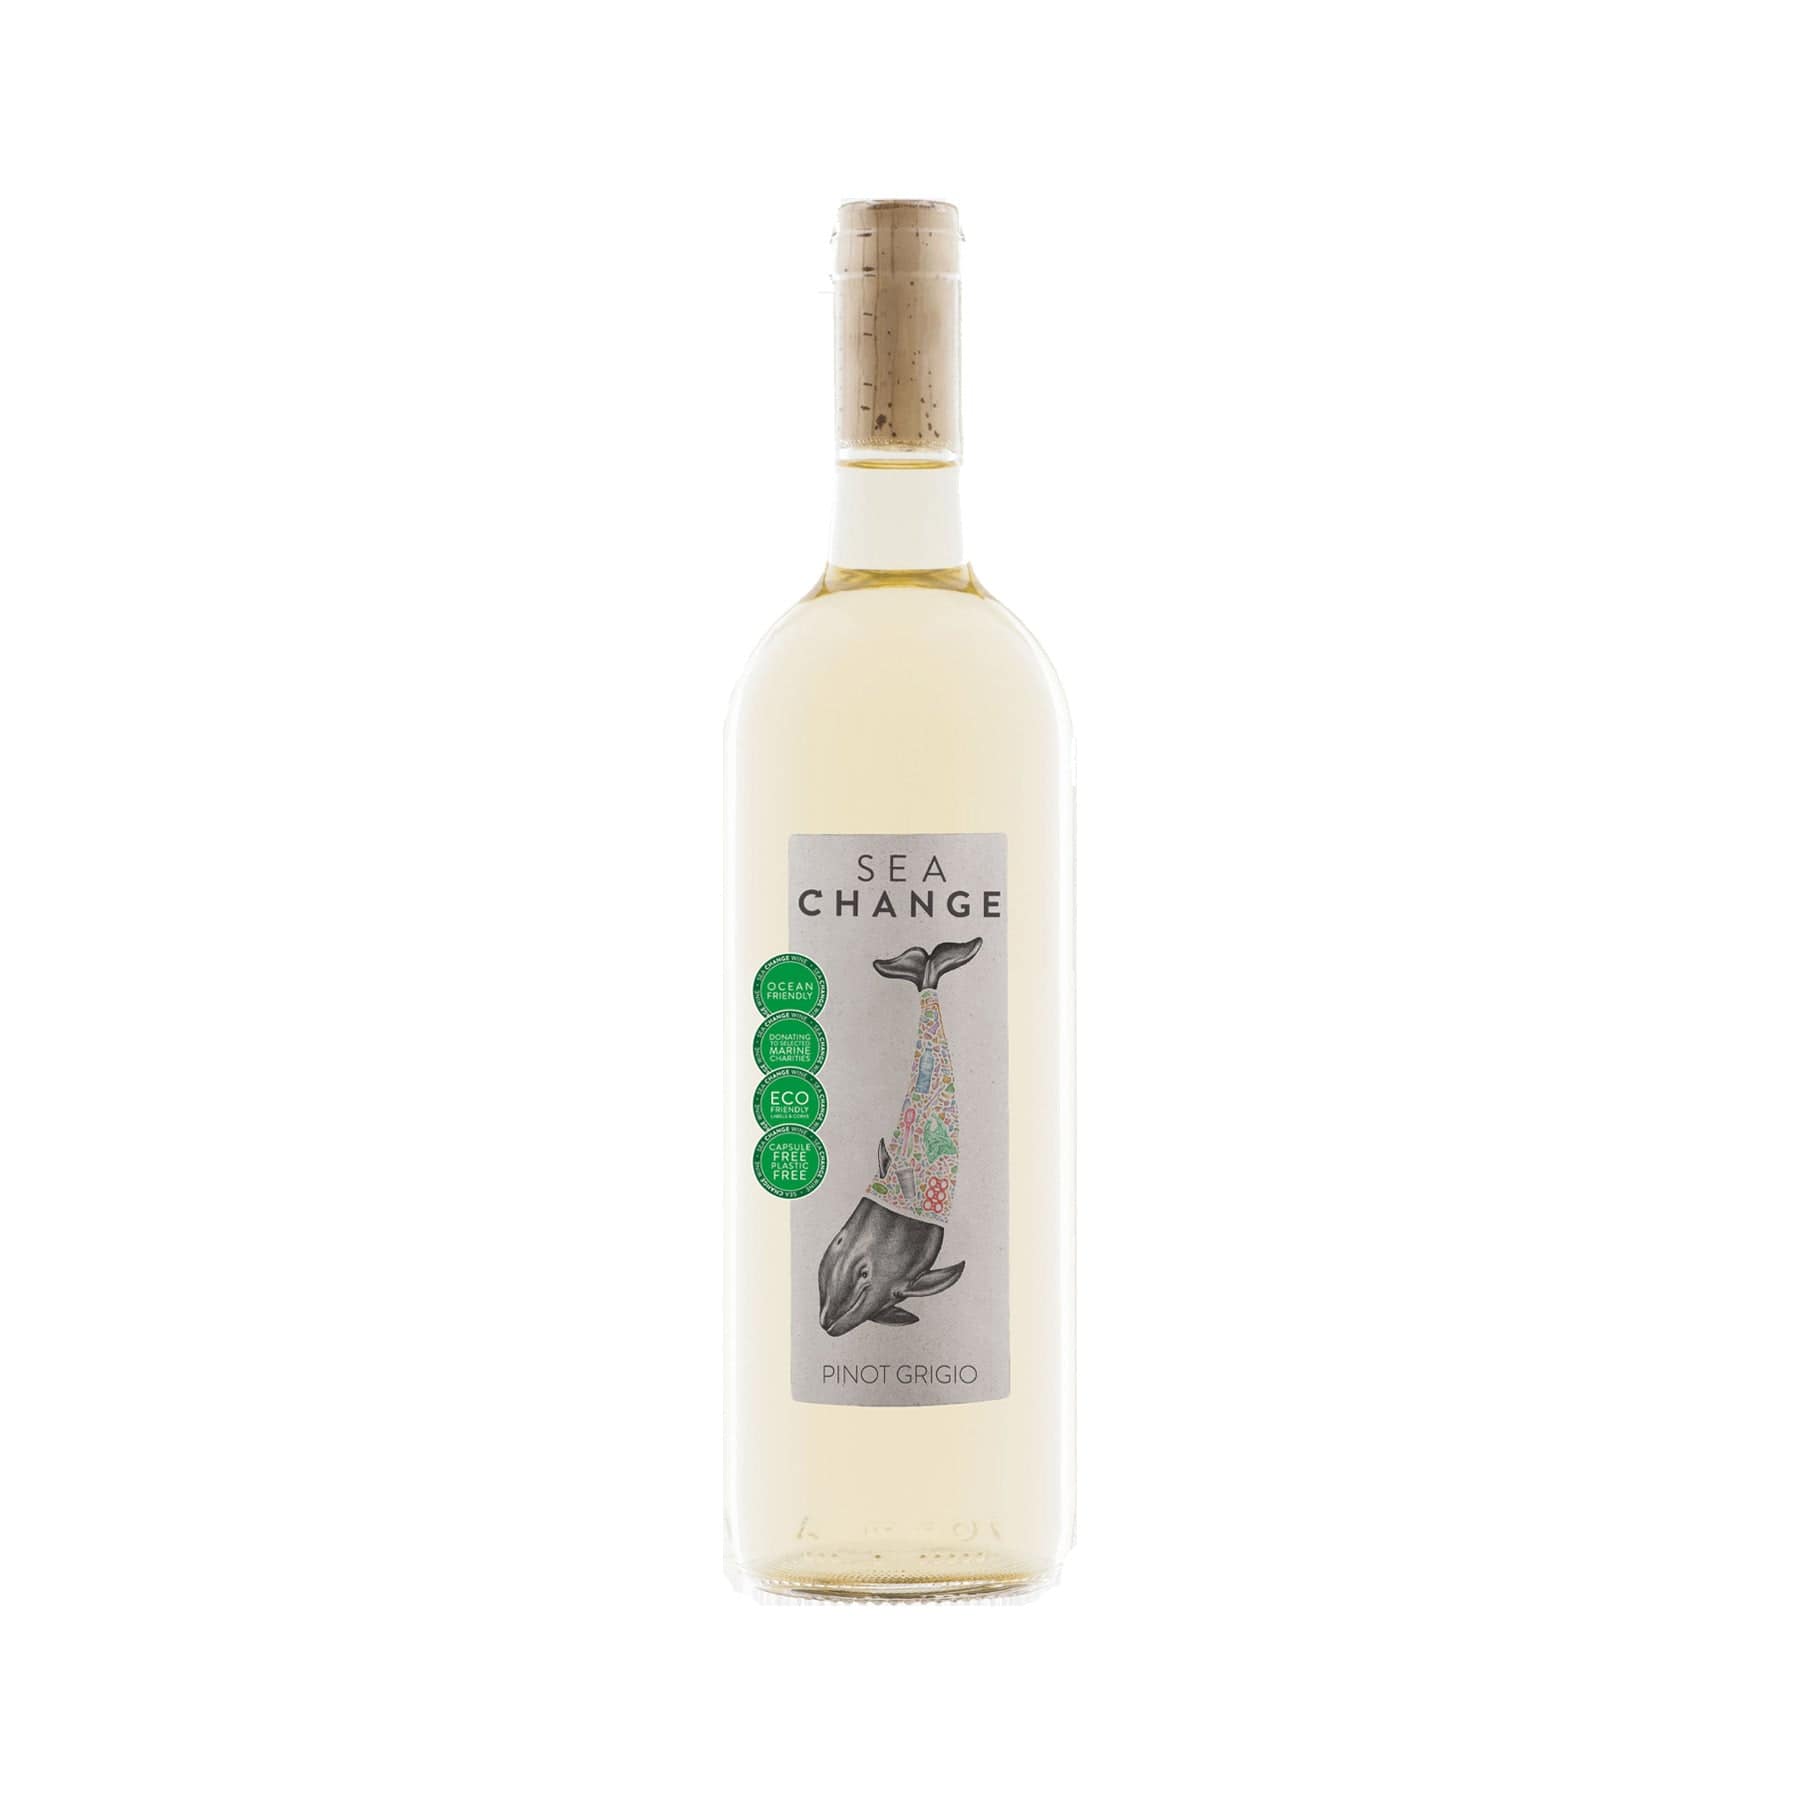 Sea Change Pinot Grigio white wine bottle with eco-friendly seals and whale illustration on label, isolated on white background.